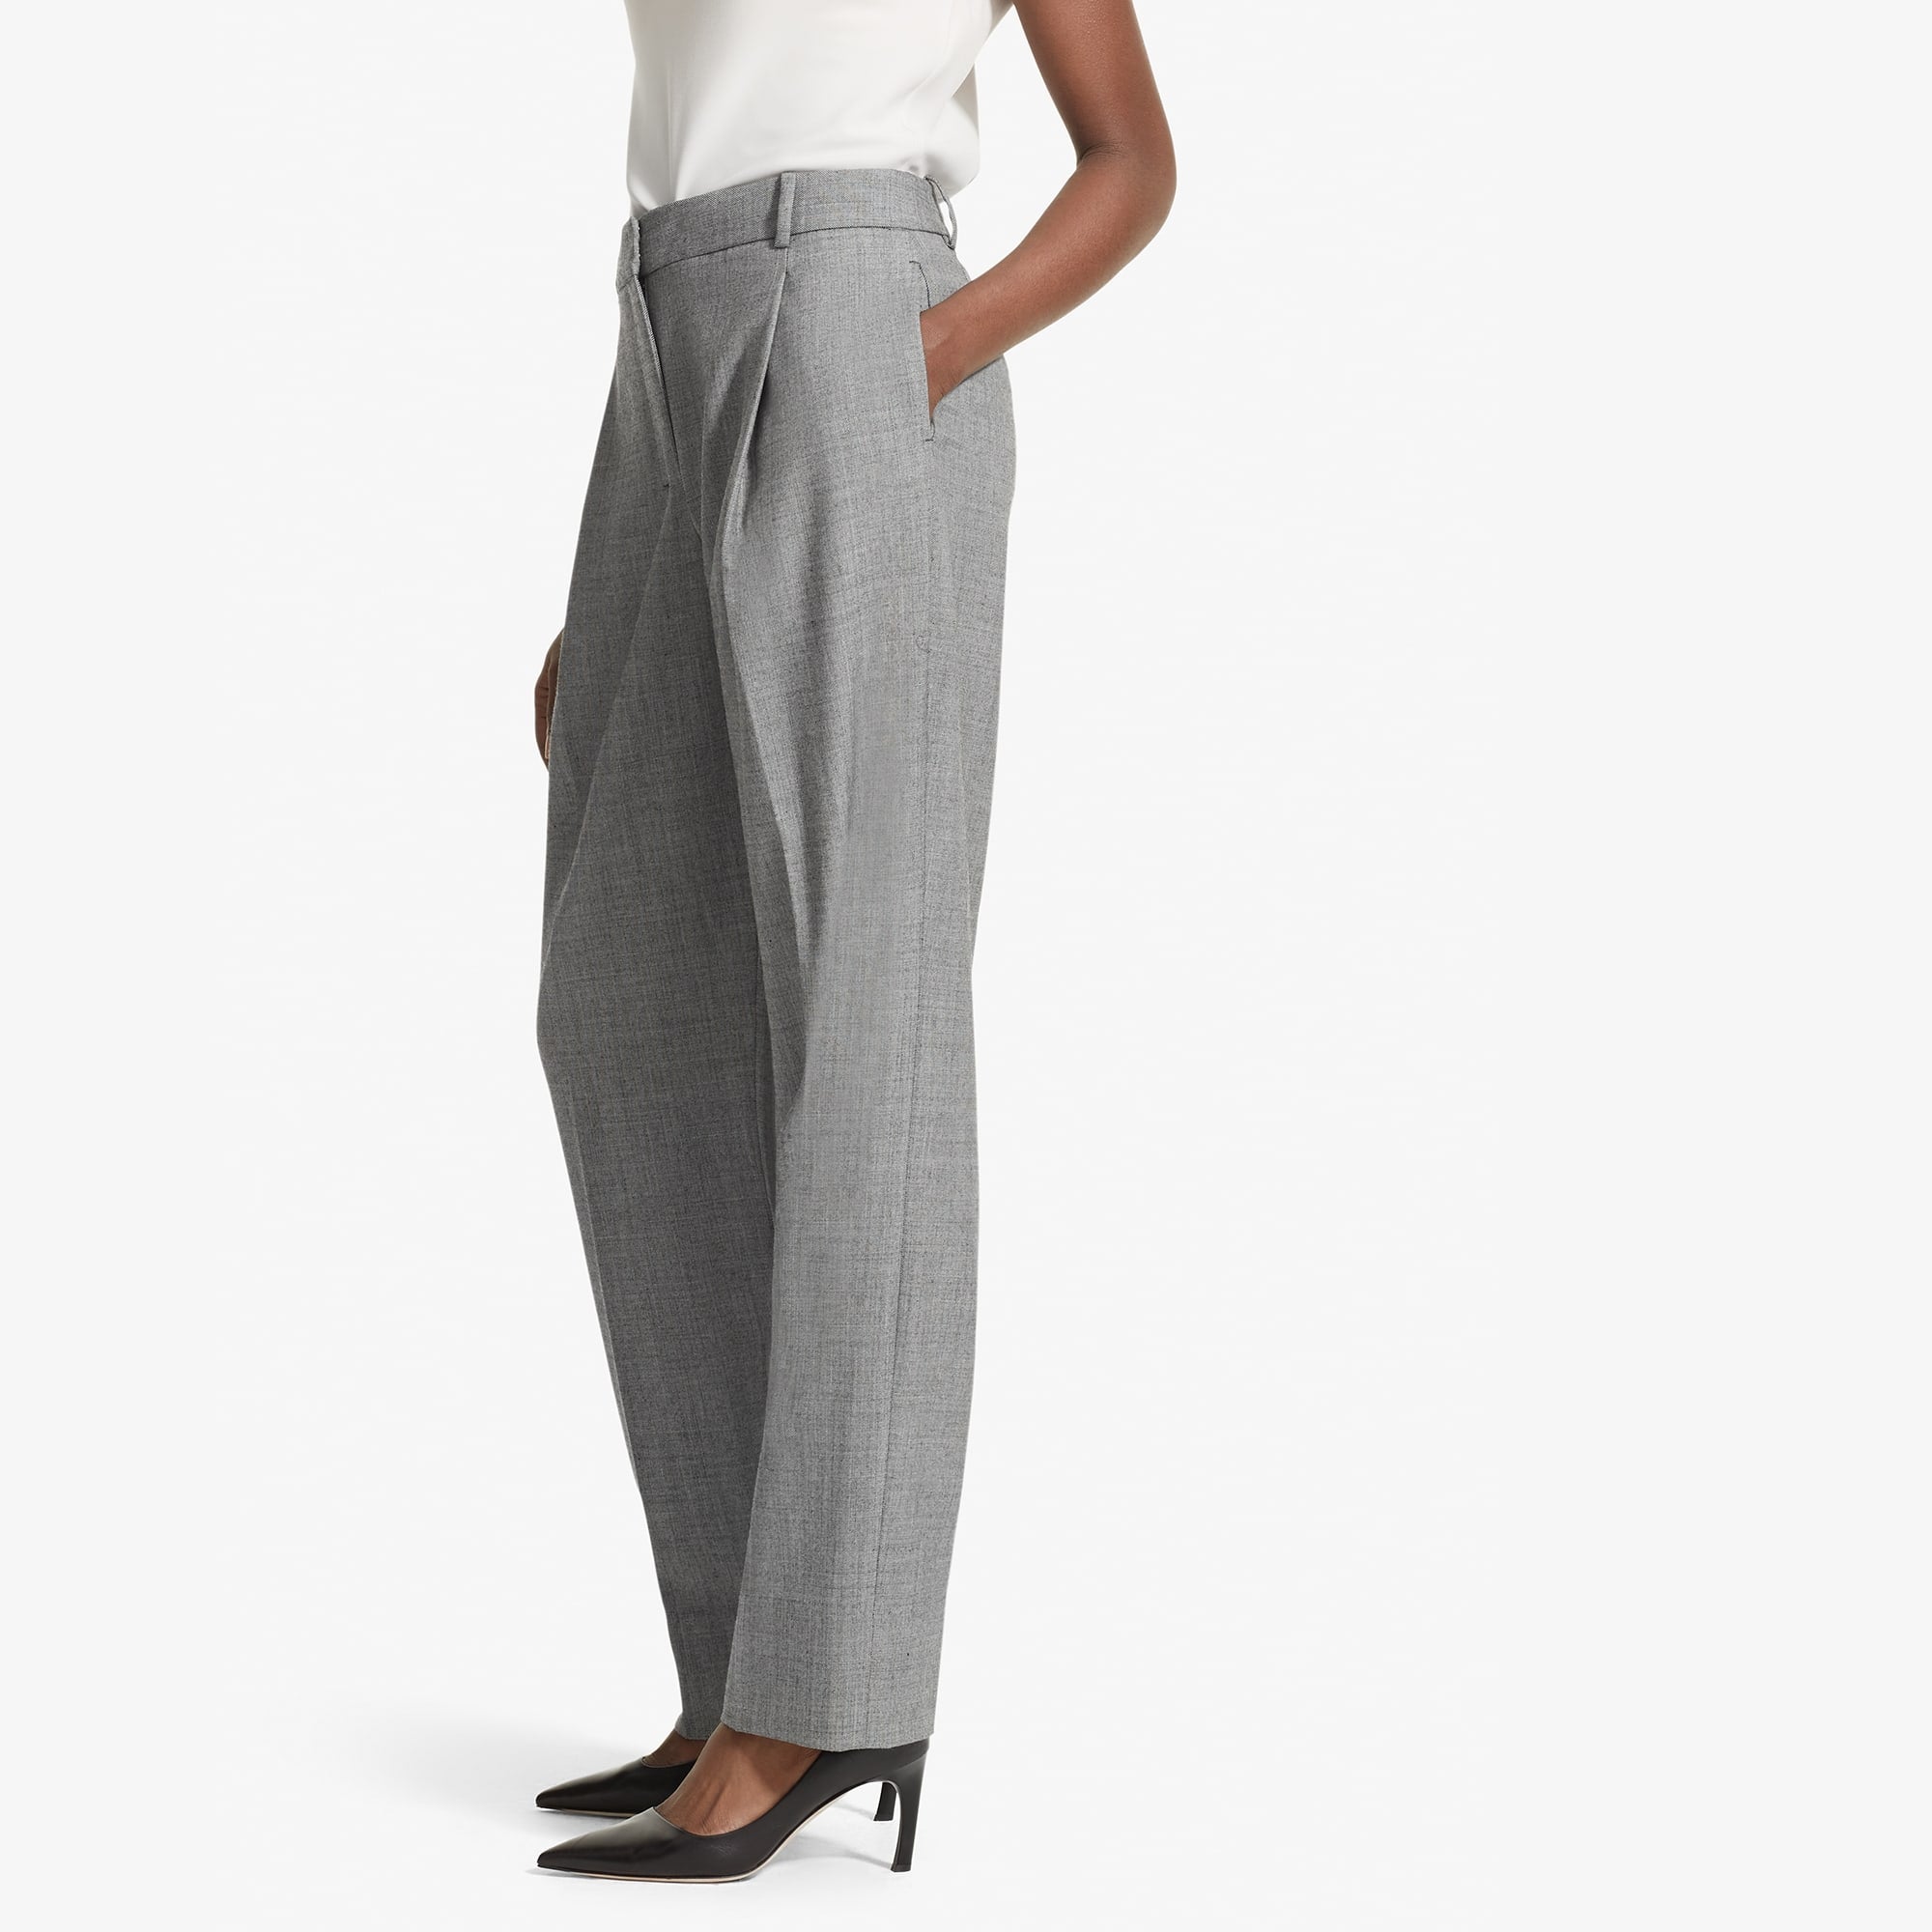 Side image of a woman standing wearing the elliott trouser--sharkskin in black and white